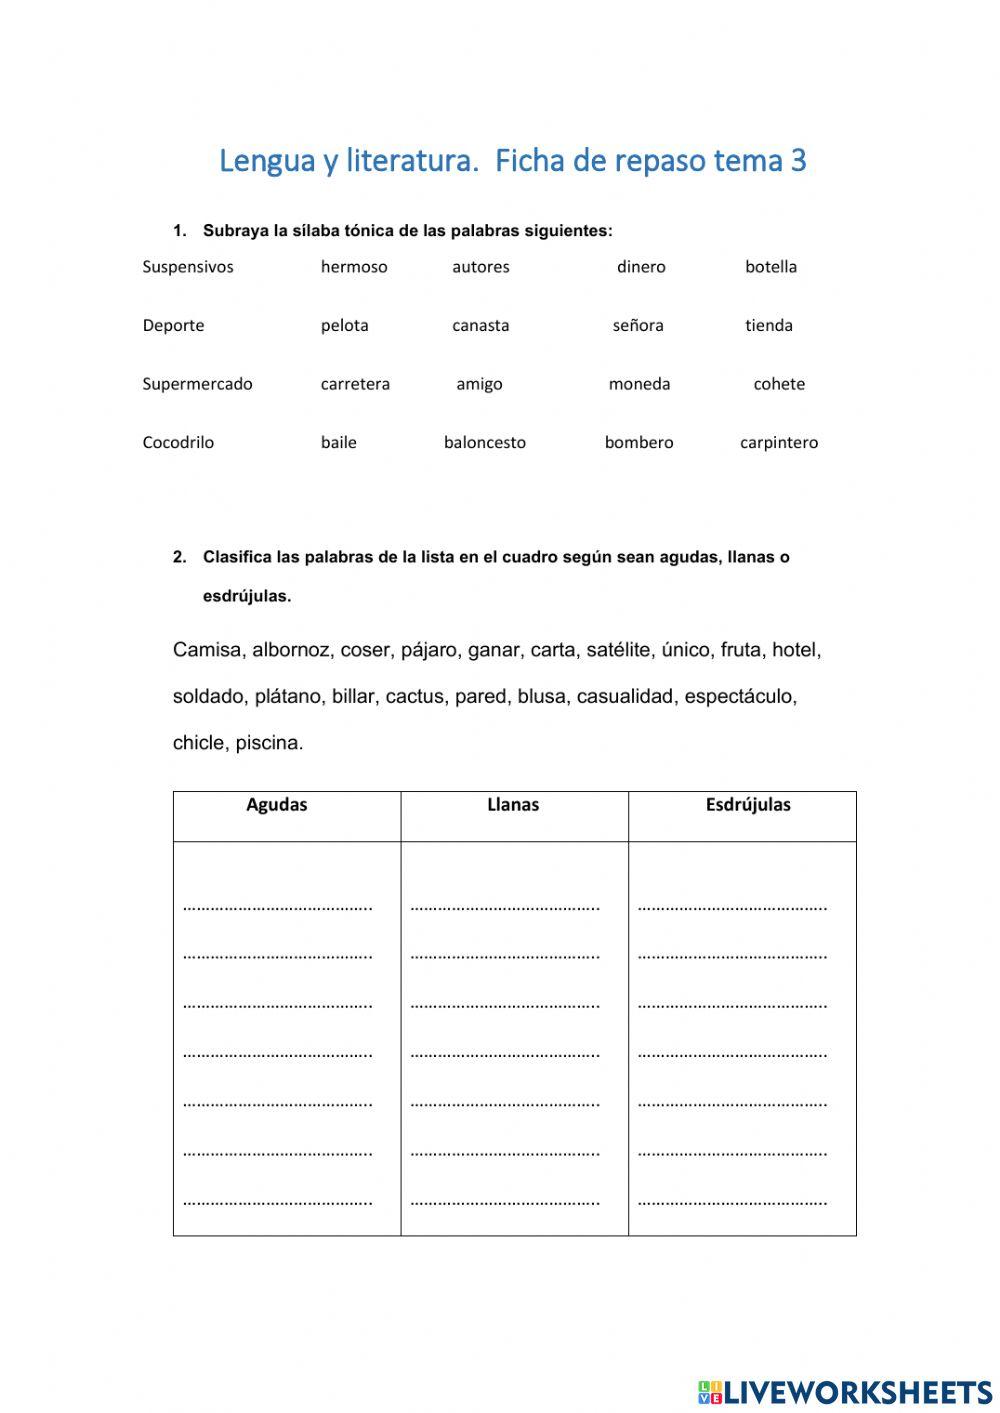 Repaso lengua online exercise for 3 | Live Worksheets